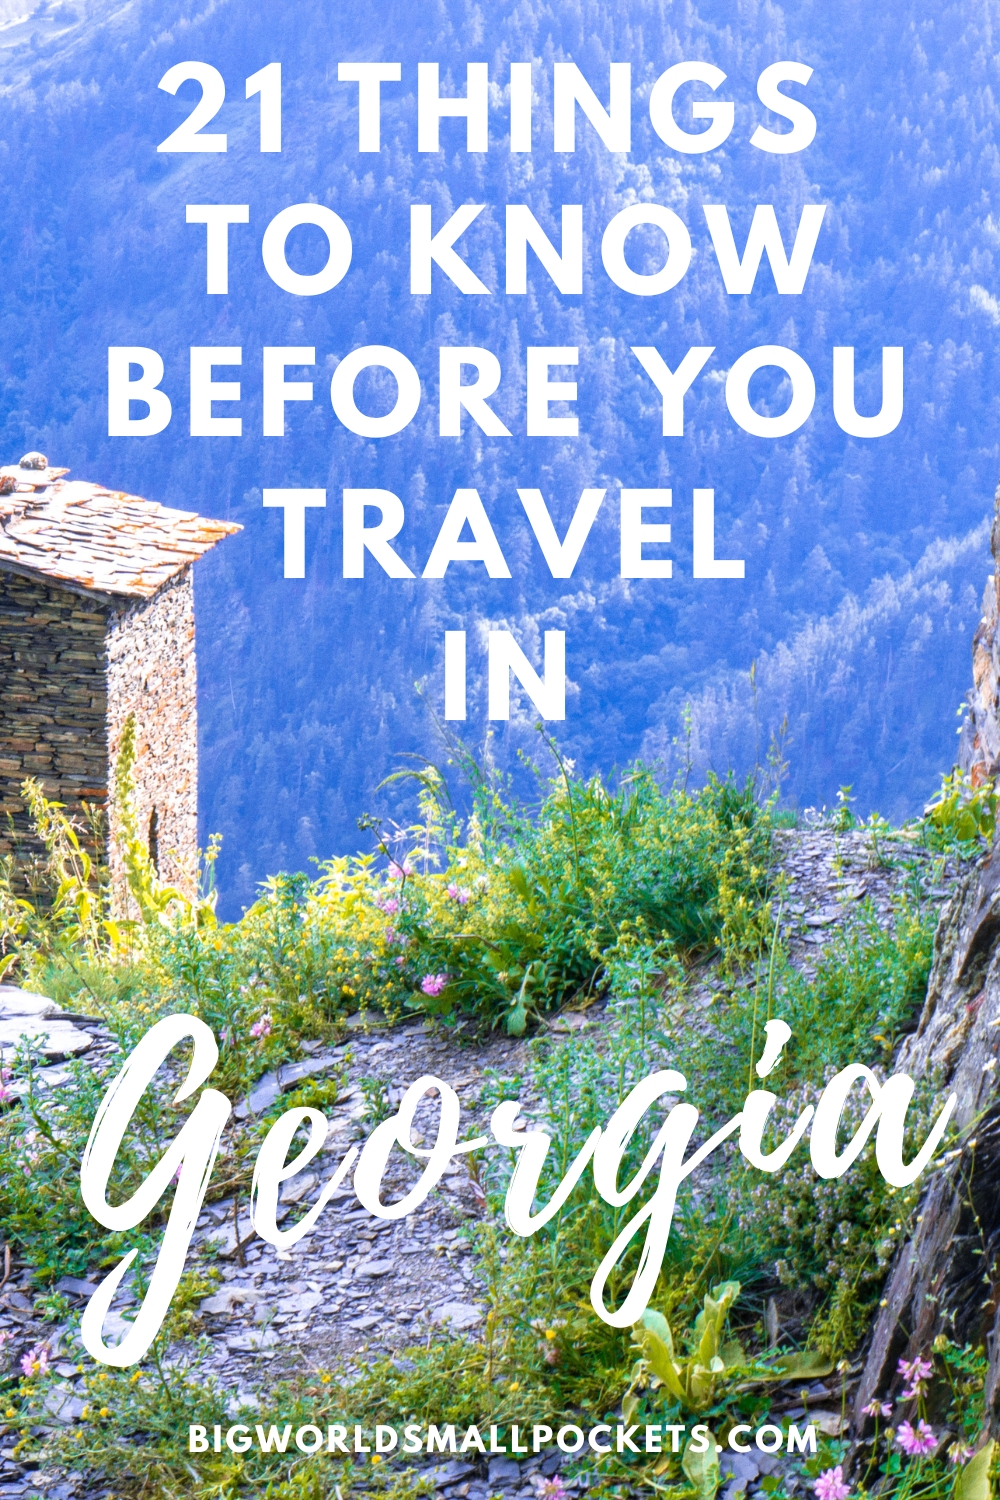 21 Things to Know Before You Travel Georgia... The Country!